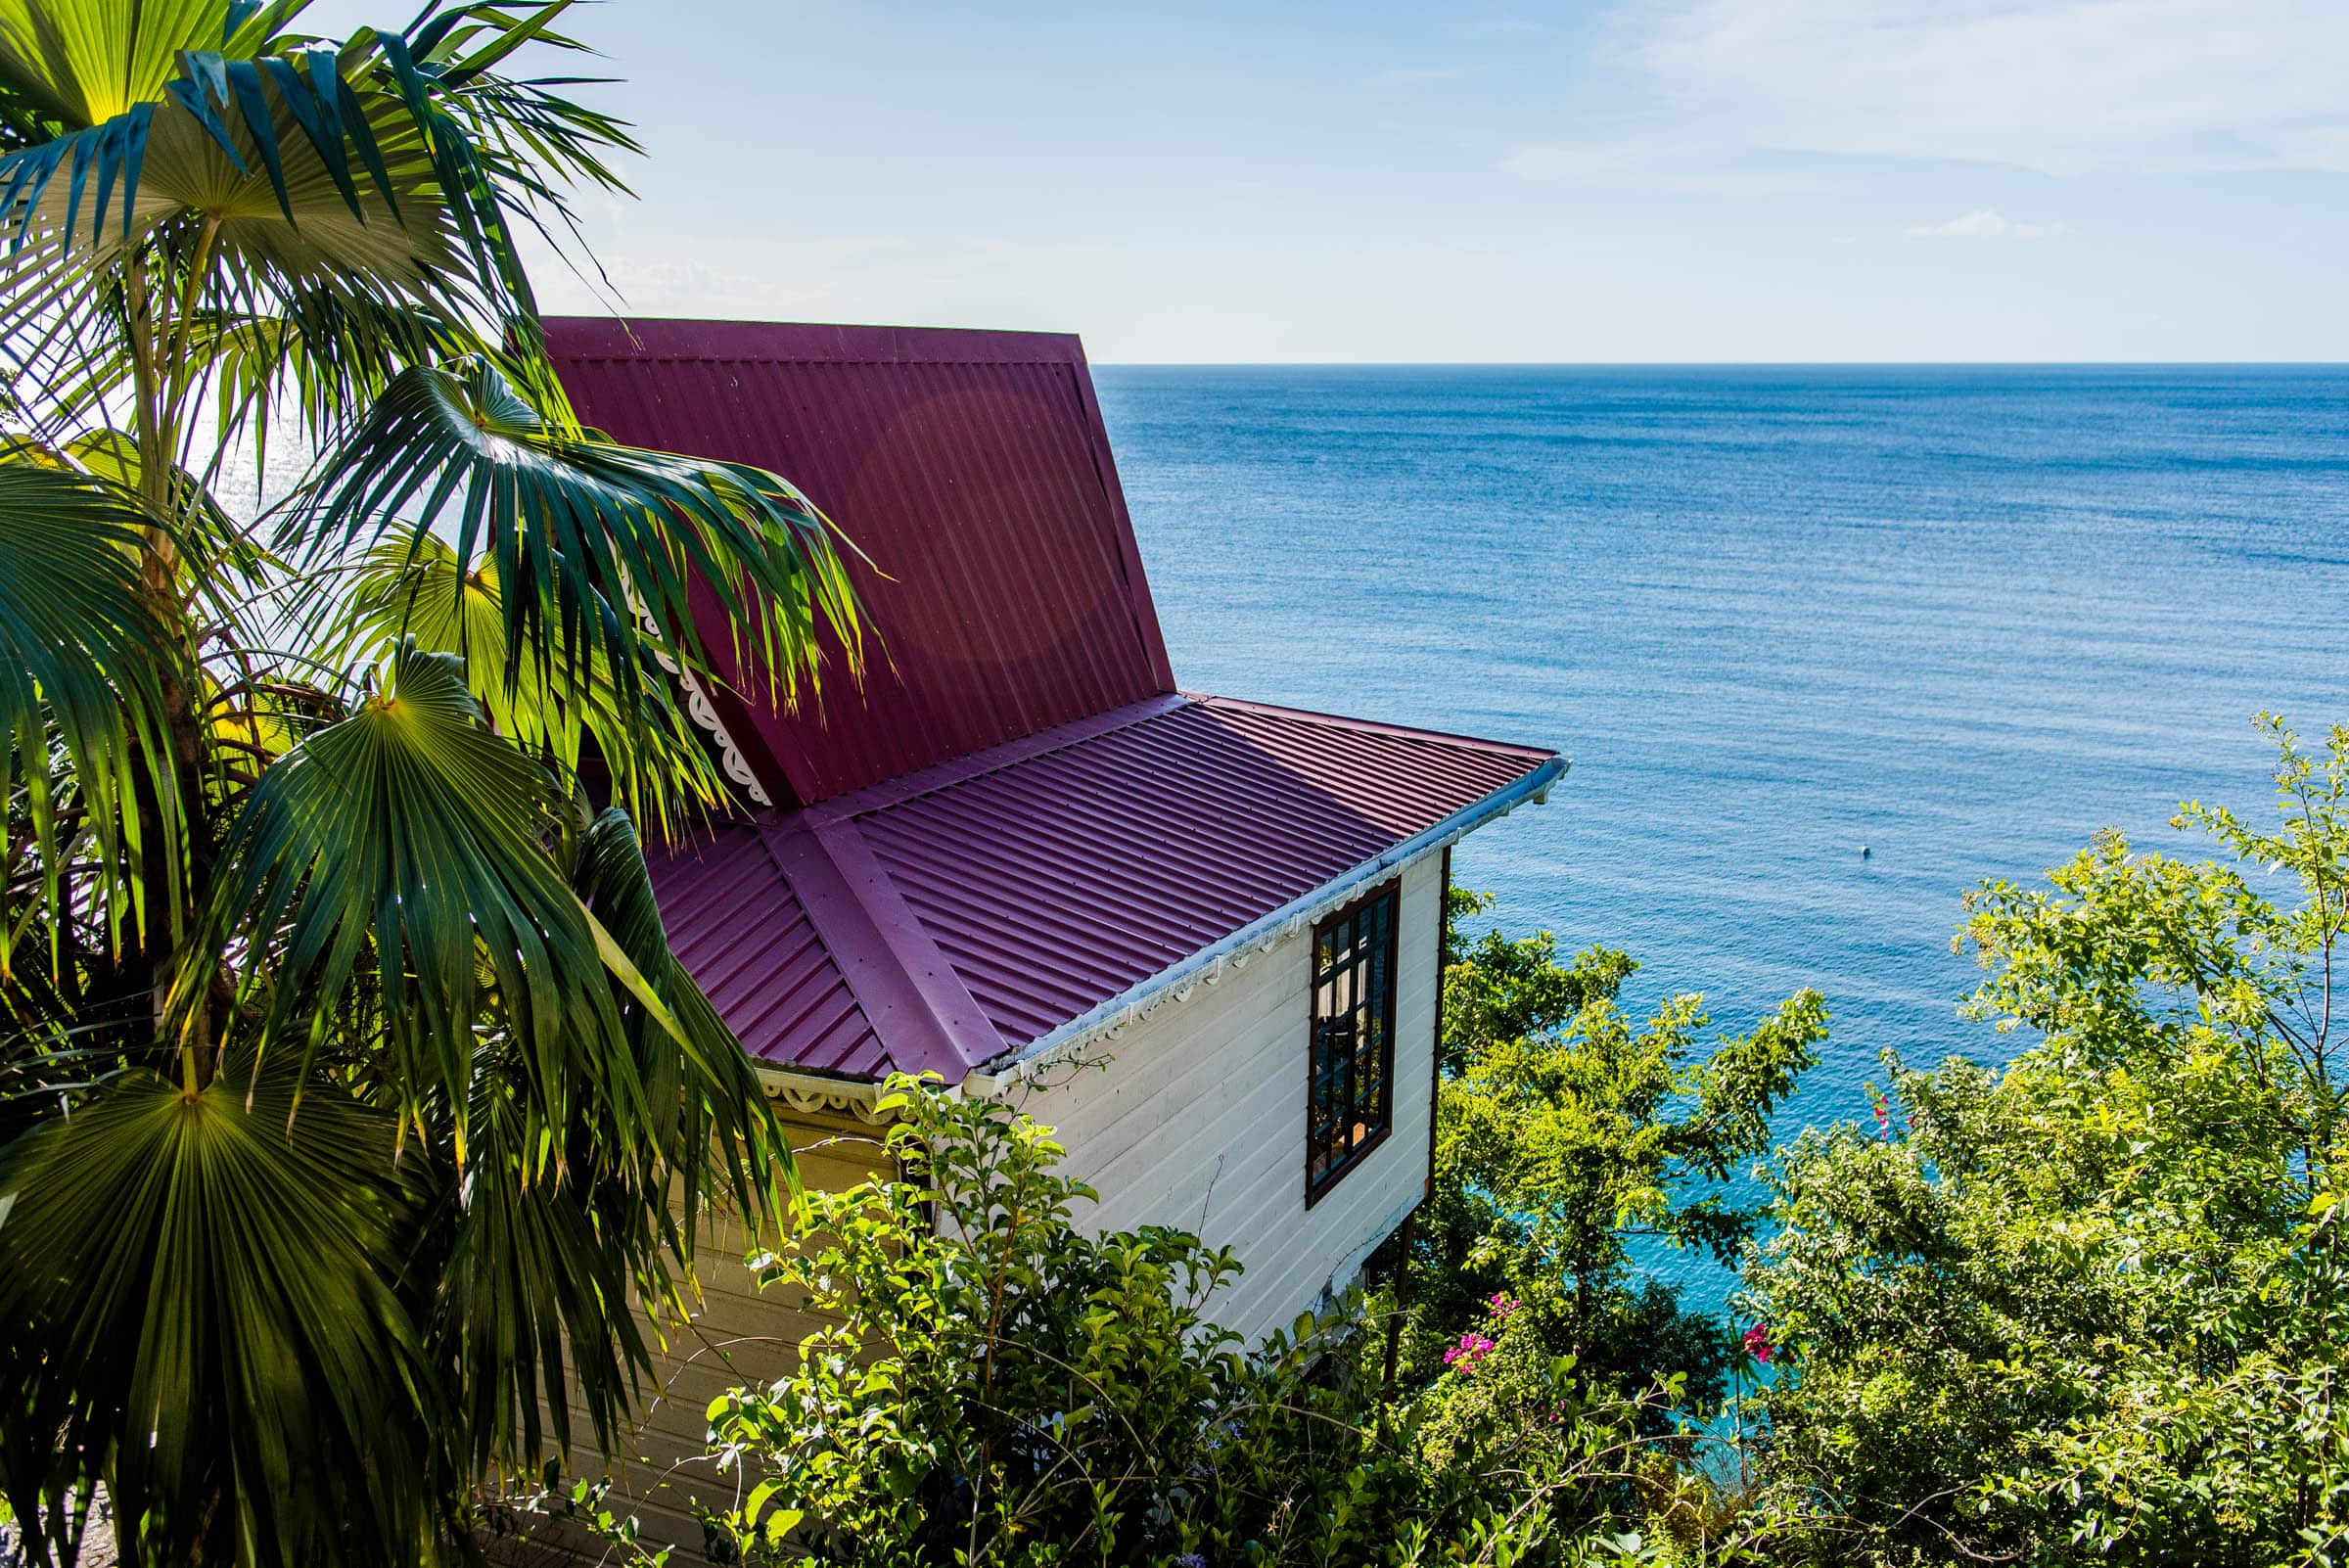 Each cottage overlooks the serene waters and silver sand of the secluded beach below